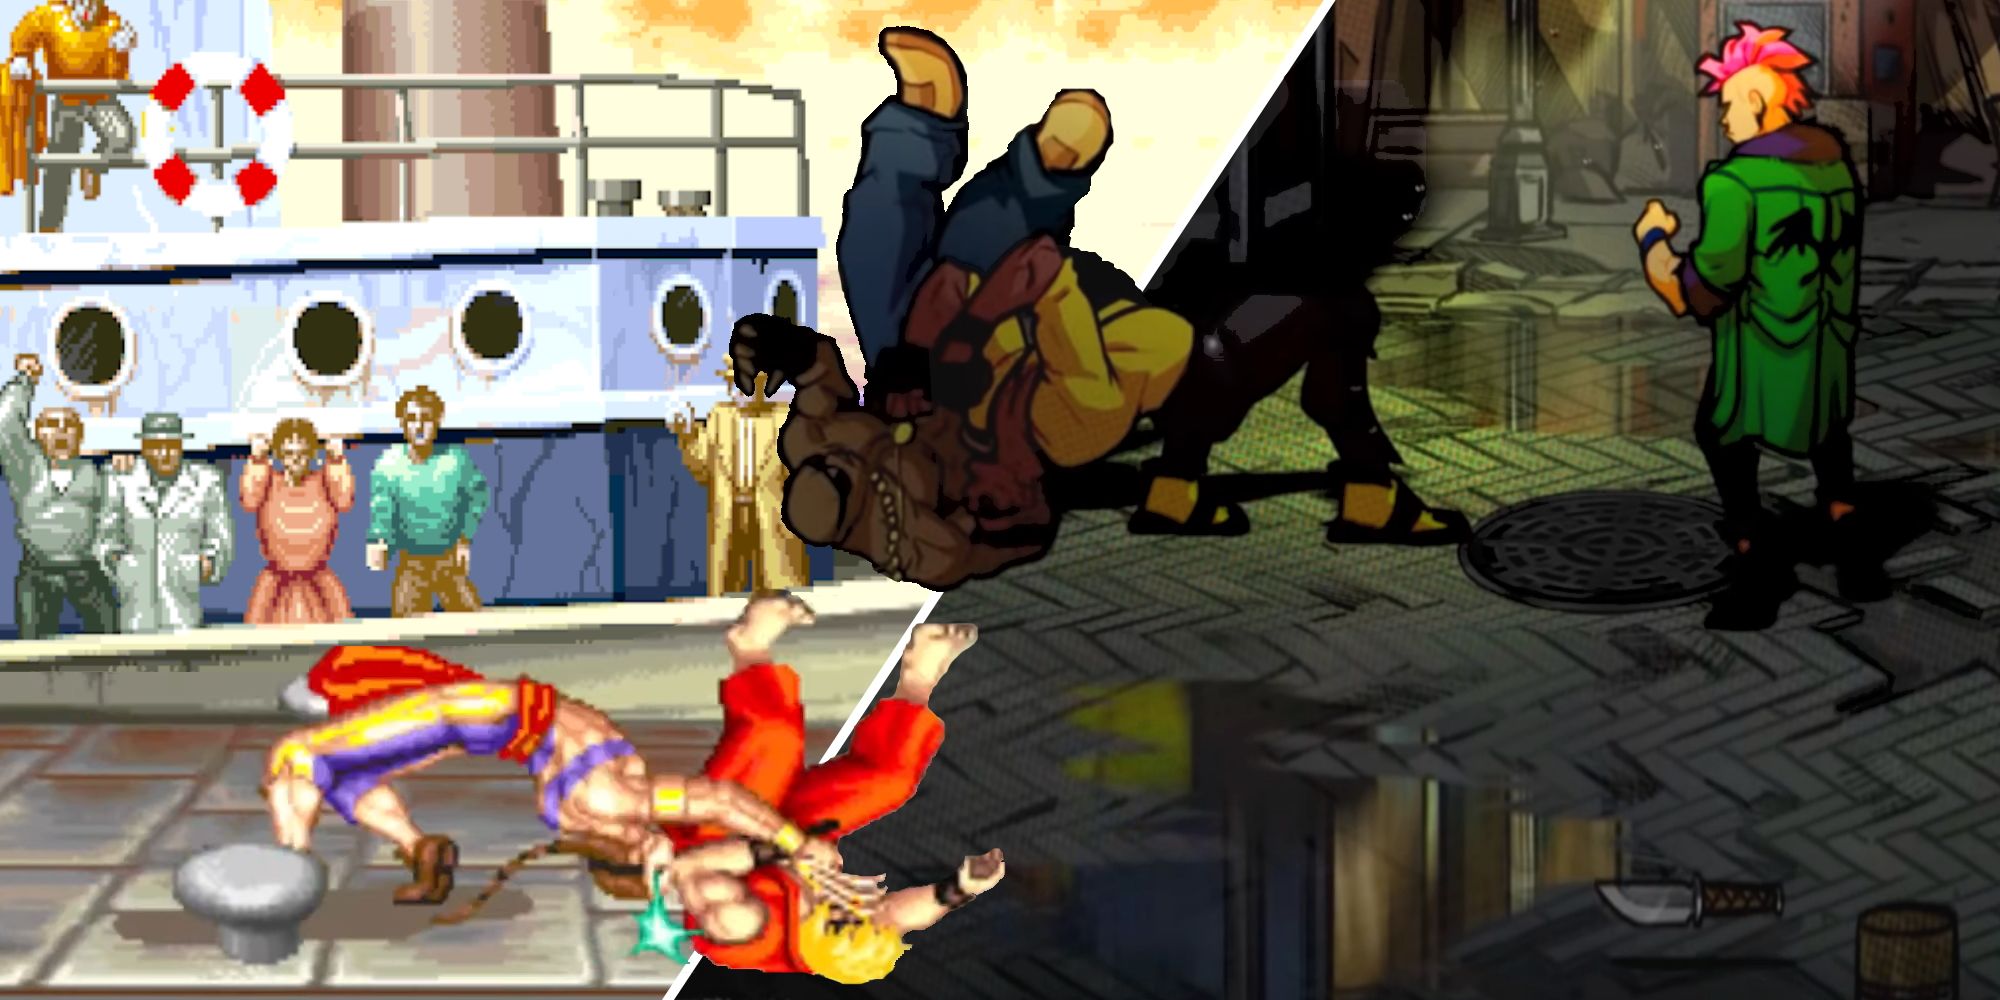 Suplex Featured Image (with a split screen image showing Vega suplexing Ken straight into Streets of Rage 4, where Adam is suplexing a goon into Street Fighter 2)